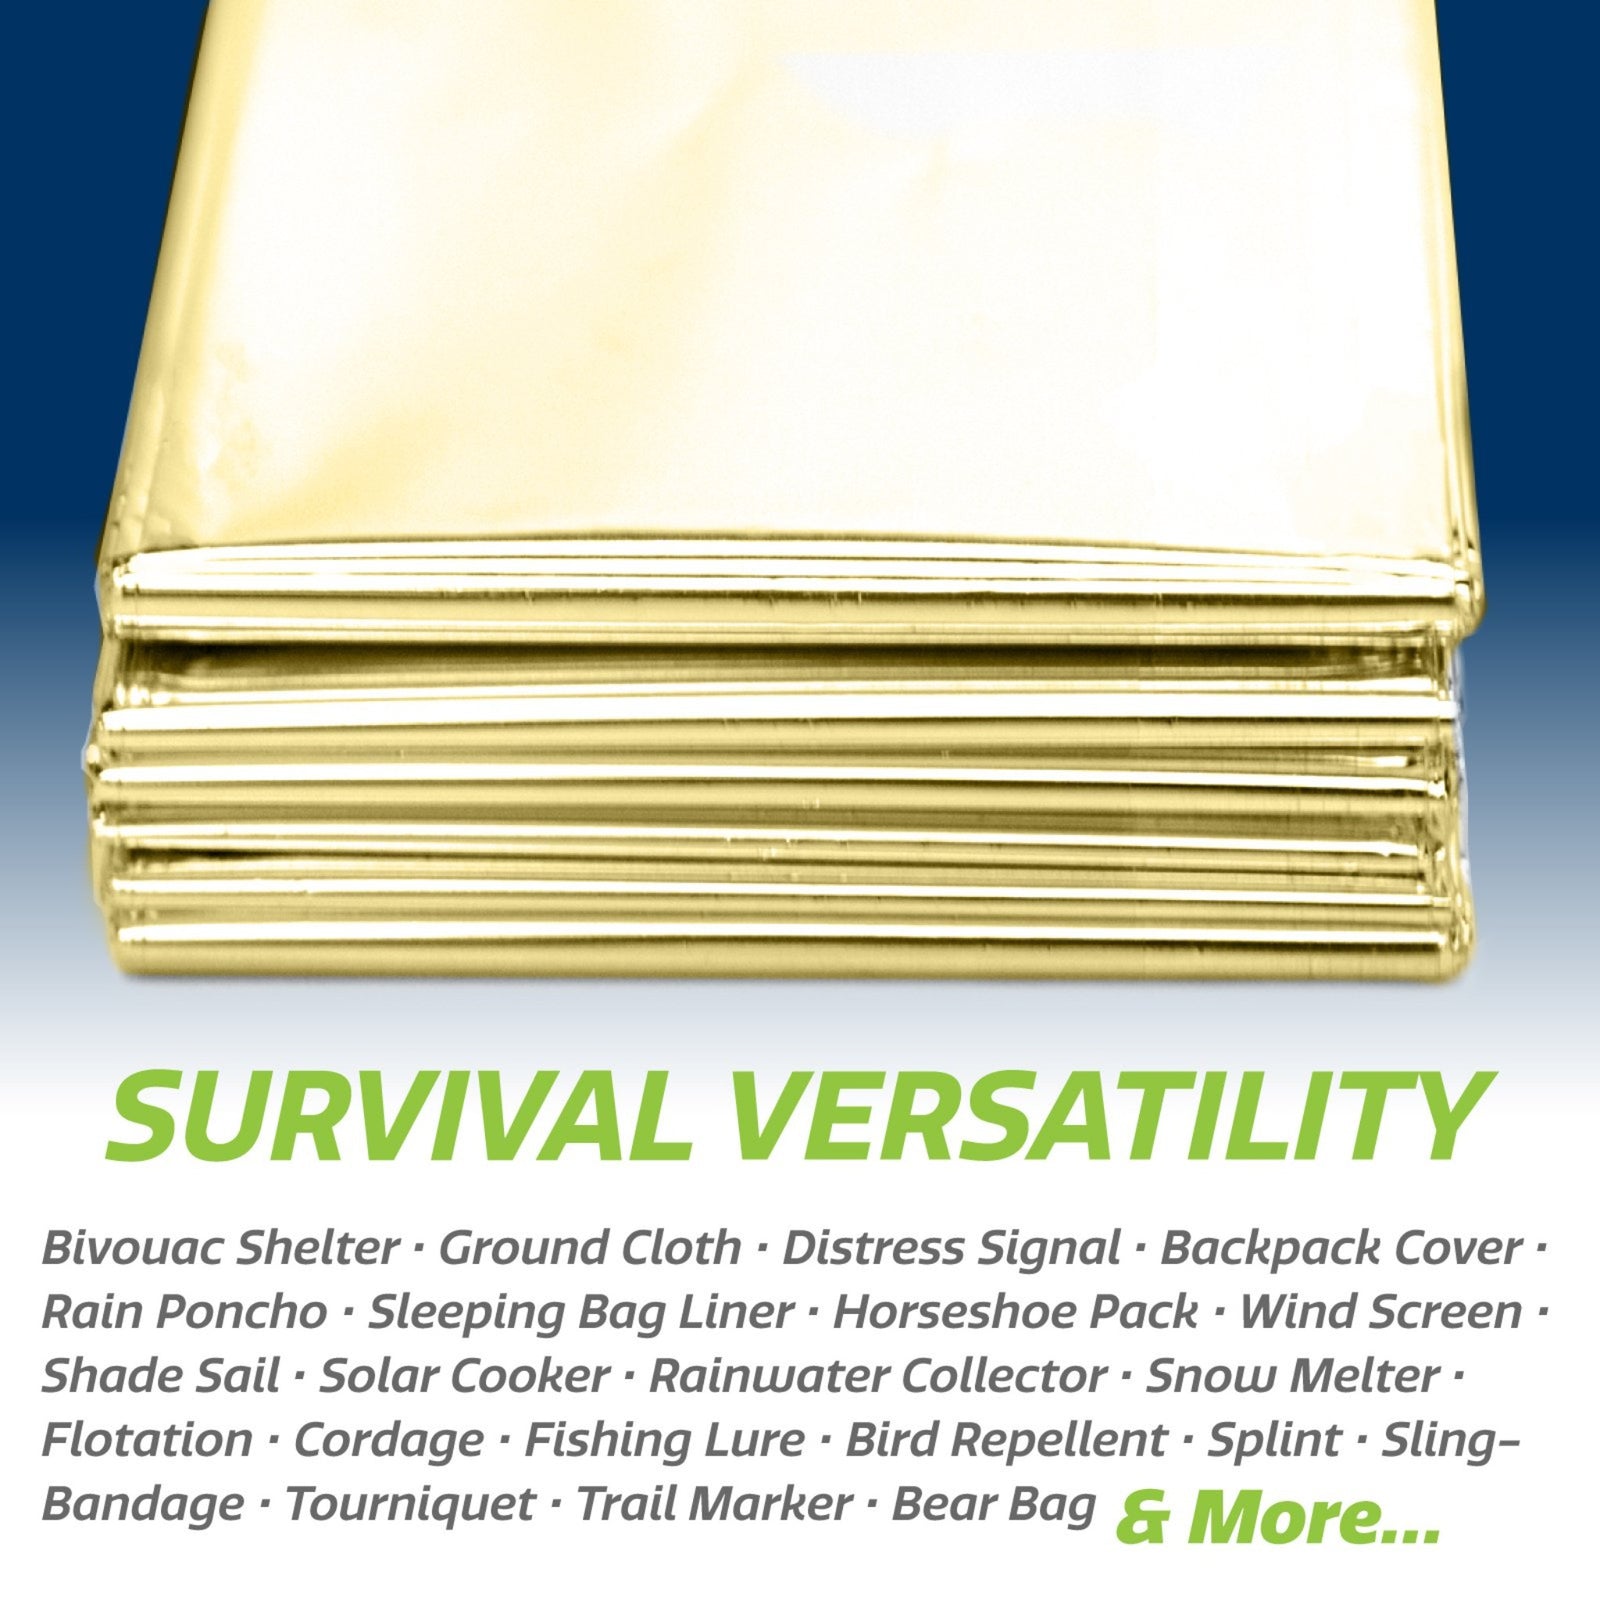 Close up of the gold and silver emergency blanket. Text reads: survival versatility. Bivouac shelter, ground cloth, distress signal, backpack cover, rain poncho, sleeping bag liner, horseshoe pack, wind screen, shade sail, solar cooker, rainwater collector, snow melter, flotation, cordage, fishing lure, bird repellent, splint, sling-bandage, tourniquet-trail market, bear bag, and more.